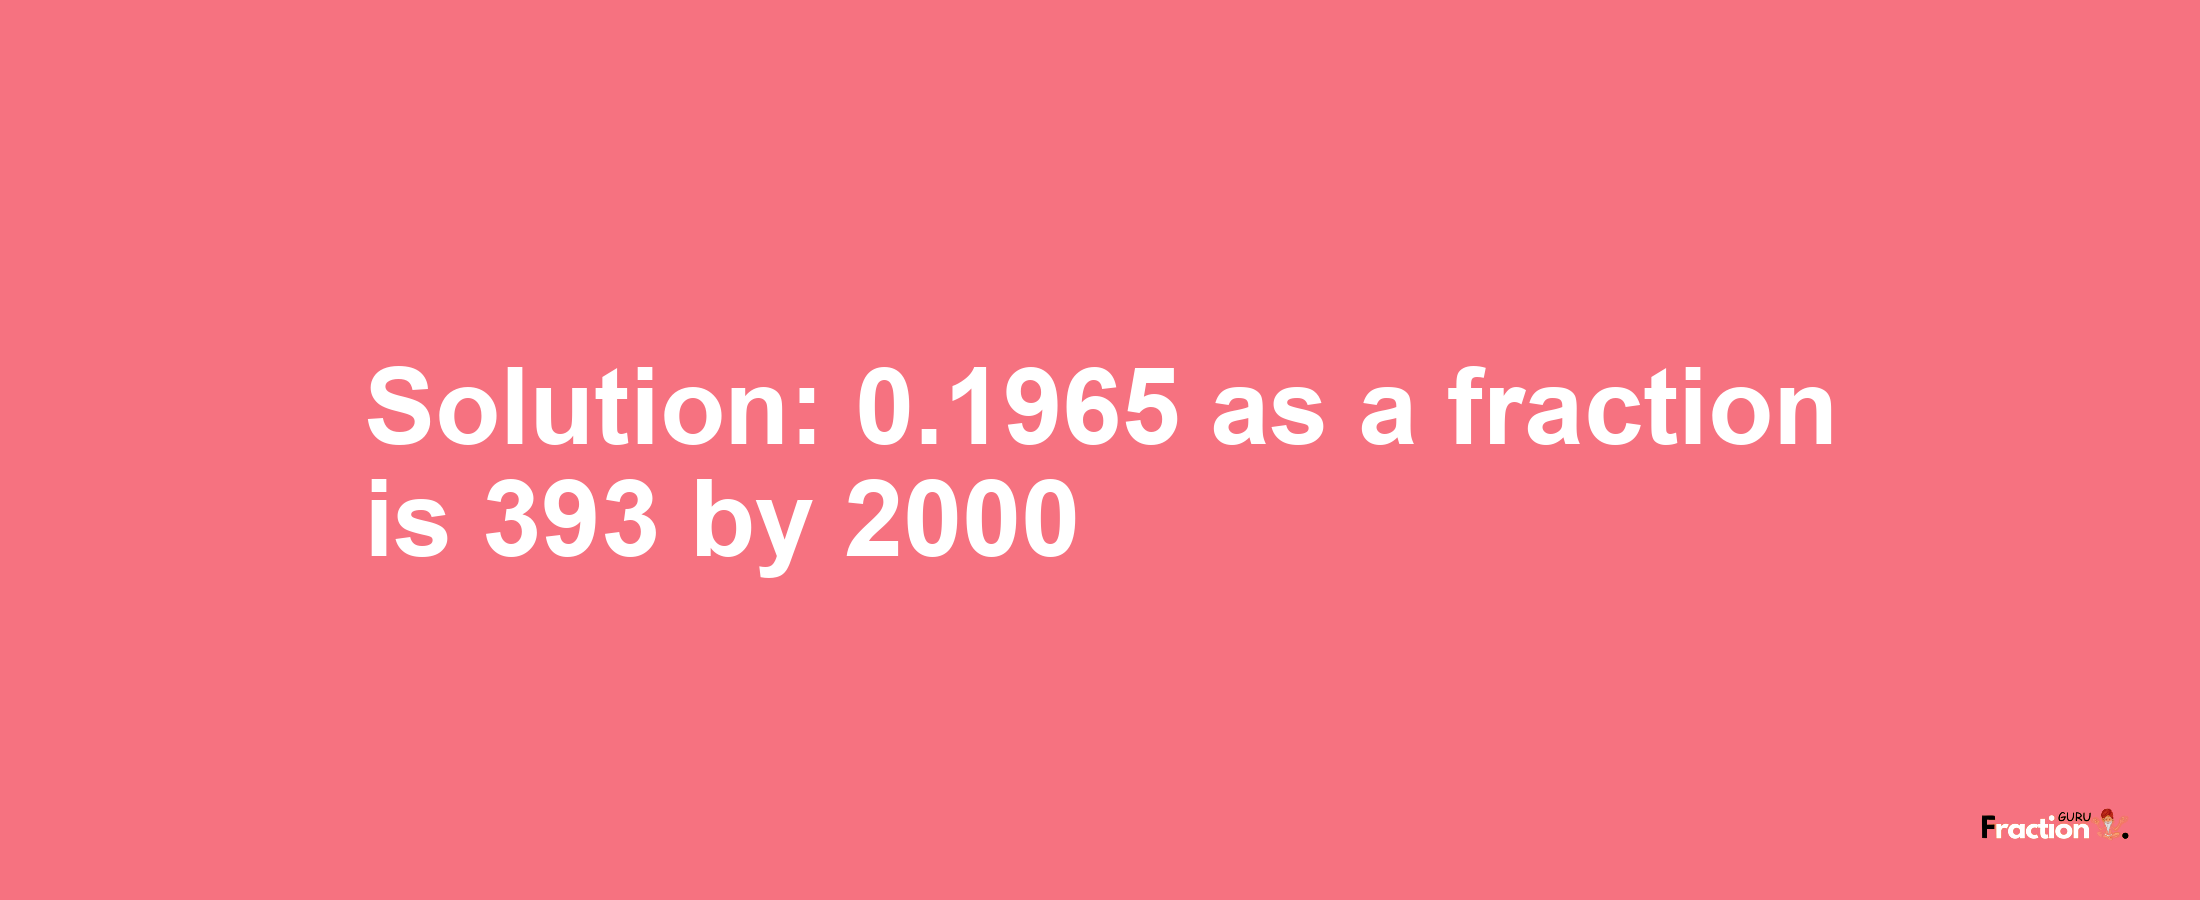 Solution:0.1965 as a fraction is 393/2000